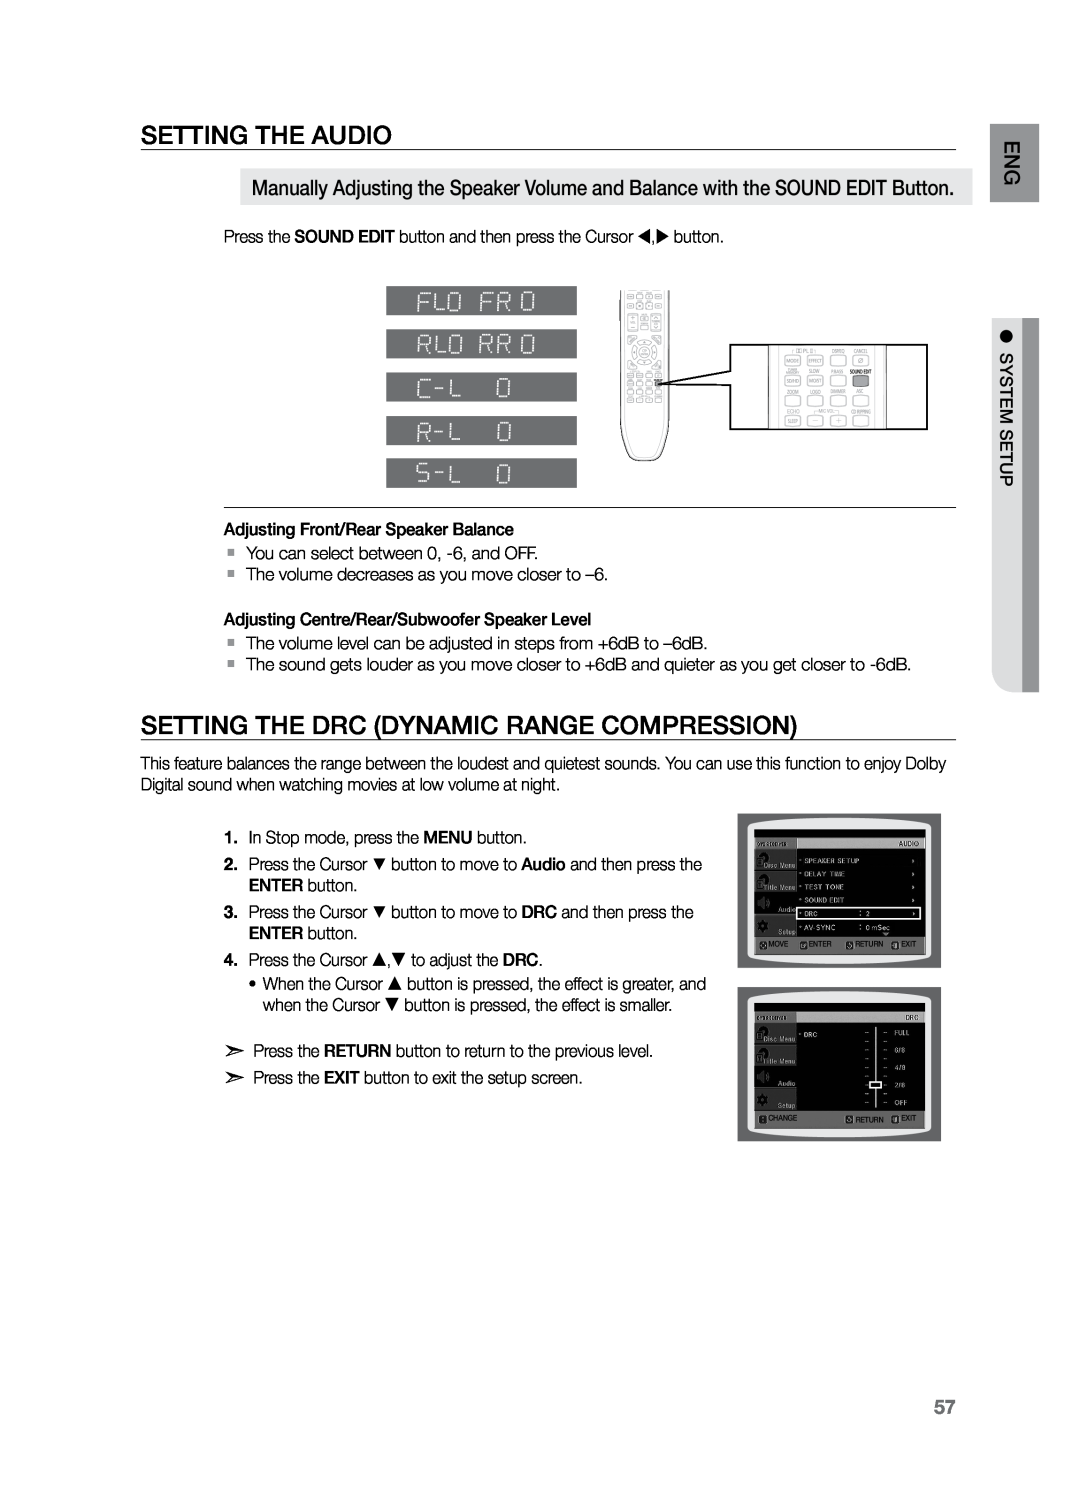 Samsung HT-TZ325R/XER, HT-Z220T/MEA, HT-TZ325T/SIM manual Setting the DRC Dynamic Range Compression, Setting the Audio 